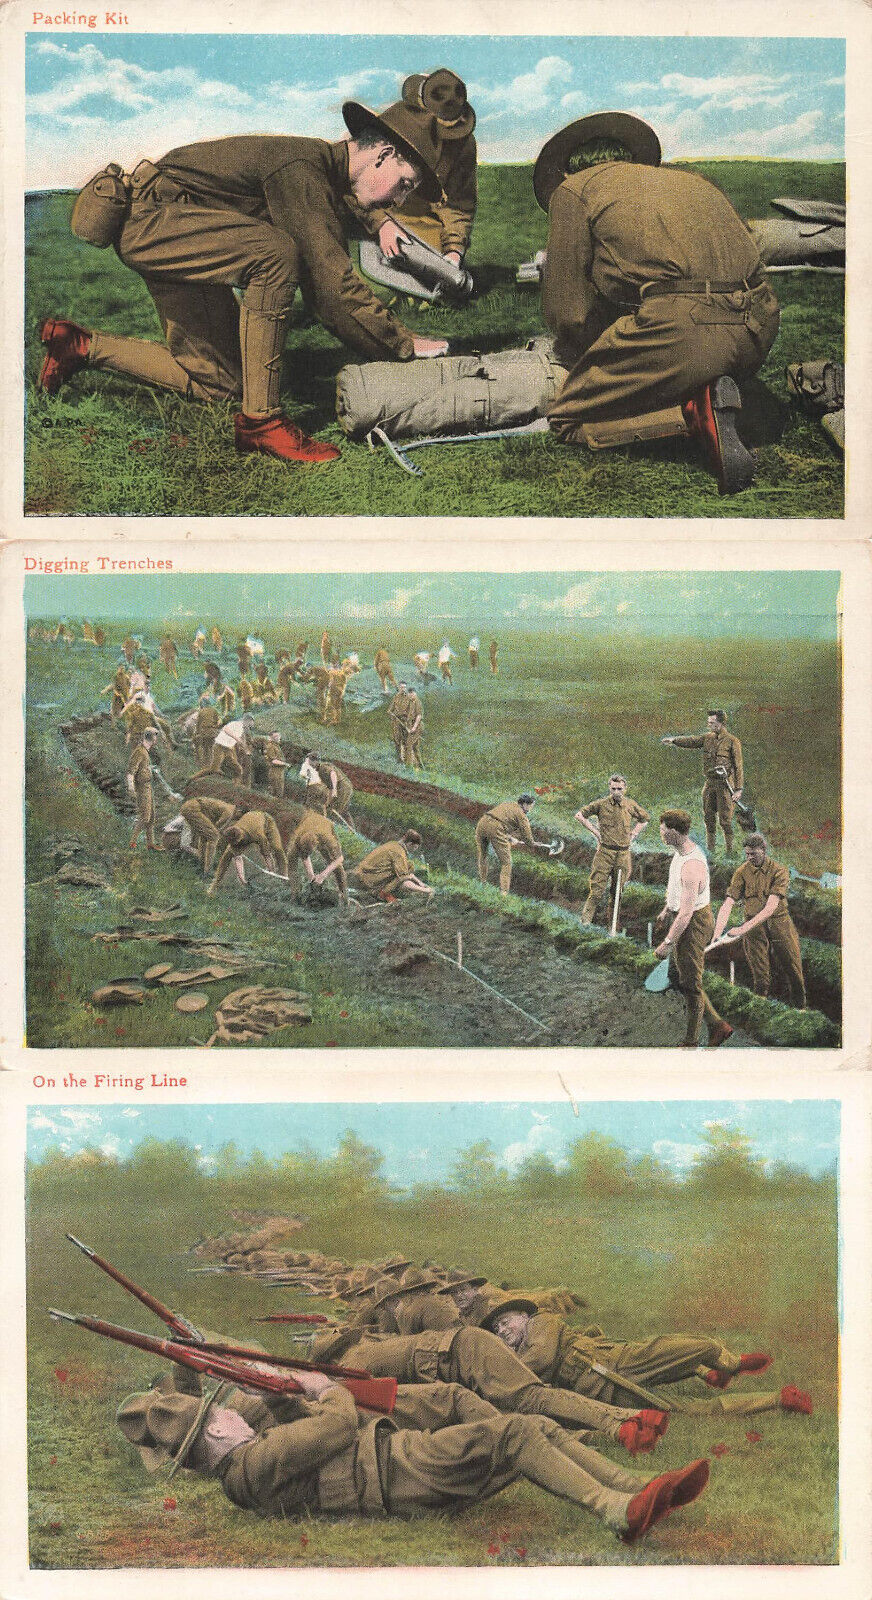 LOT OF 3 WWI US ARMY POSTCARDS PACK KIT DIG TRENCH ON FIRING LINE c1918 110923 S